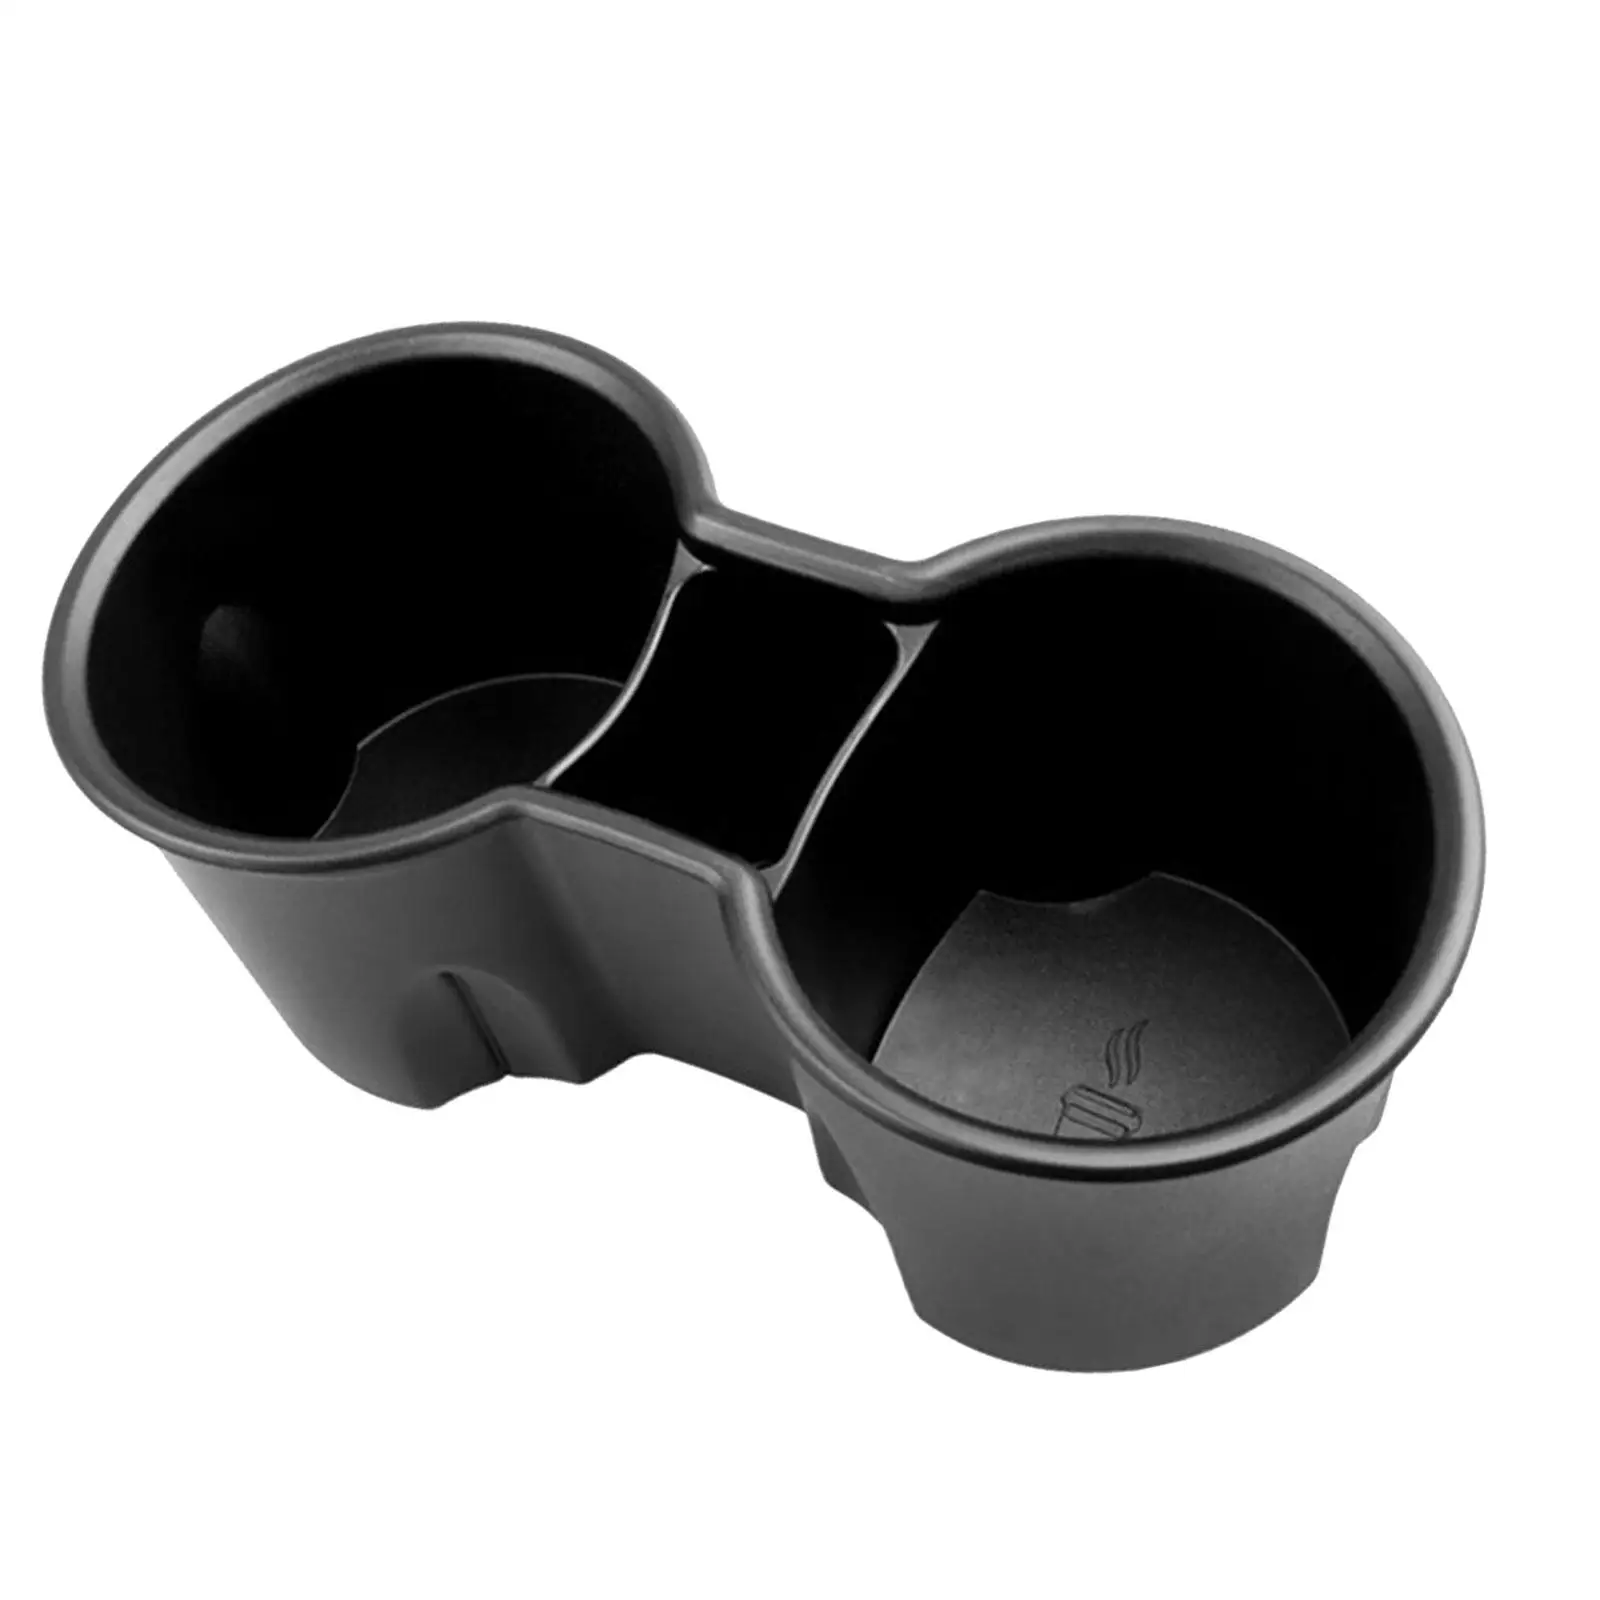 Car Center Console Cup Holder Insert Drinks Stand Cup Limiter Interior Accessories Organizer Auto Parts for Tesla Model 3 Y